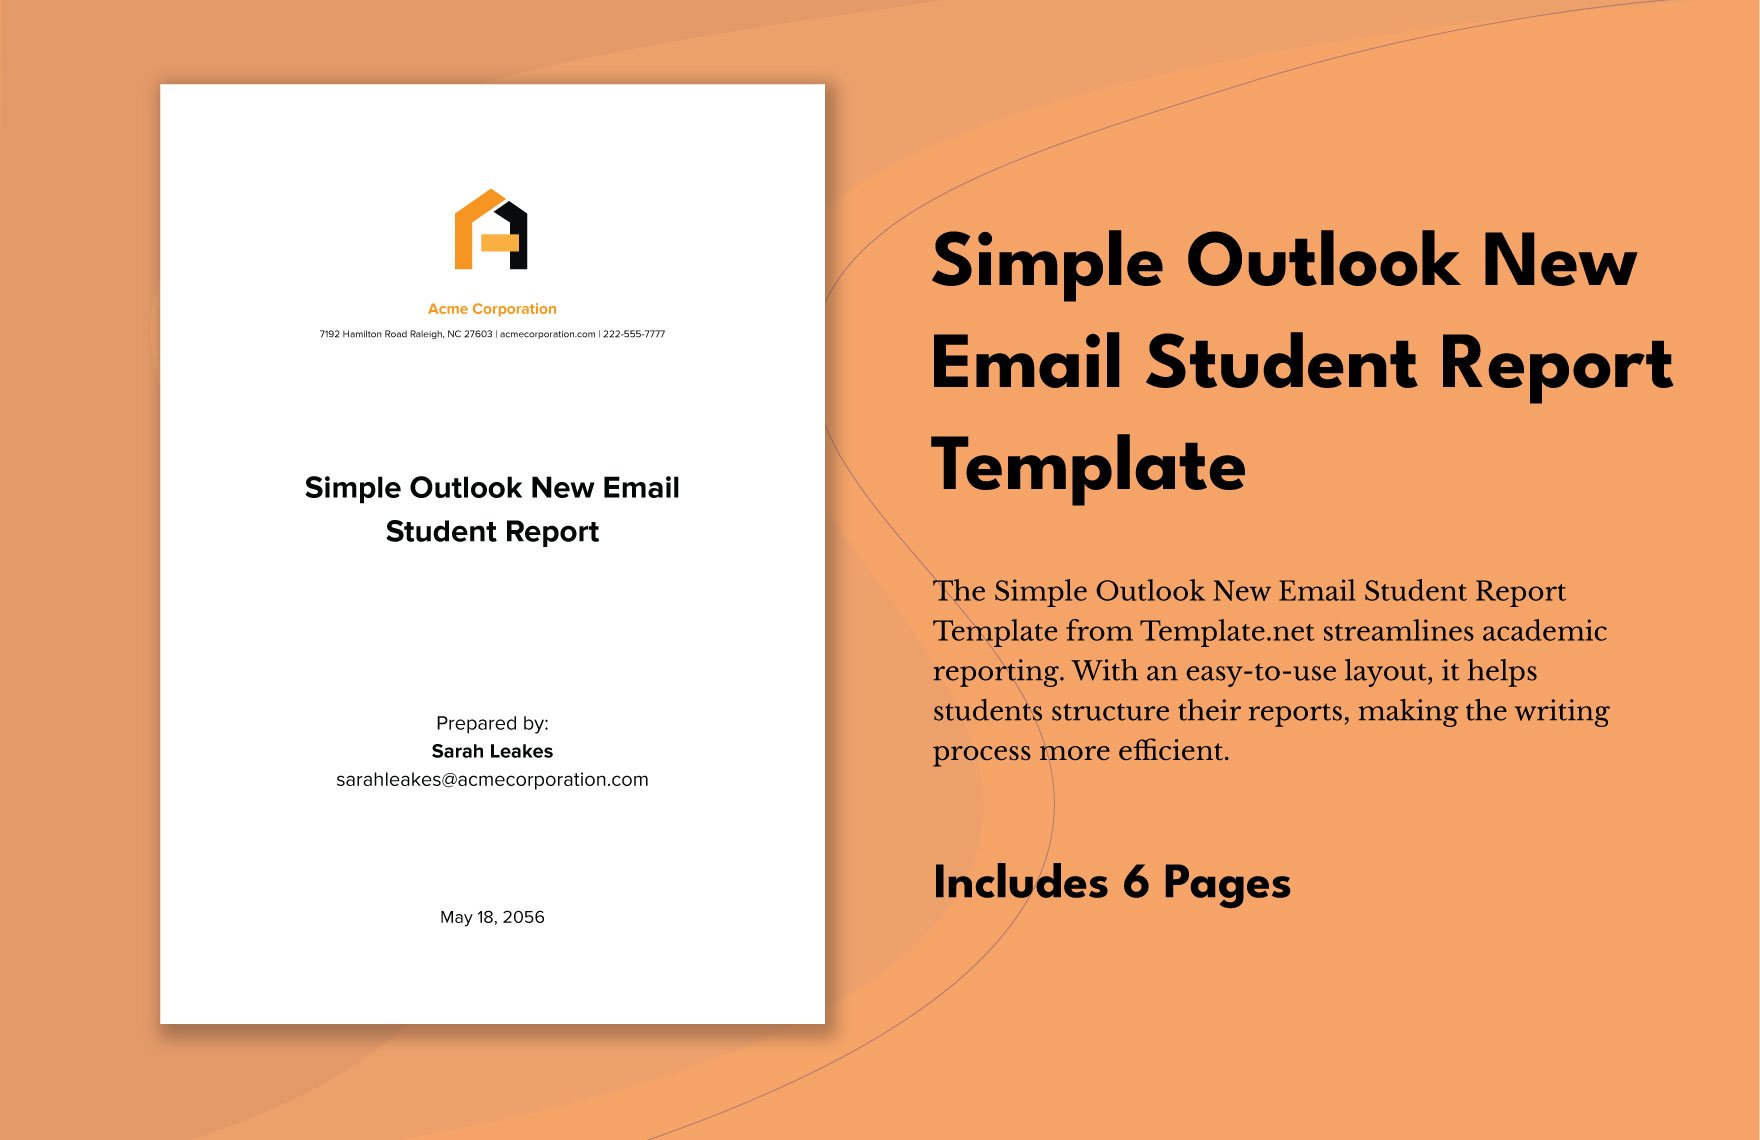 Simple Outlook New Email Student Report Template